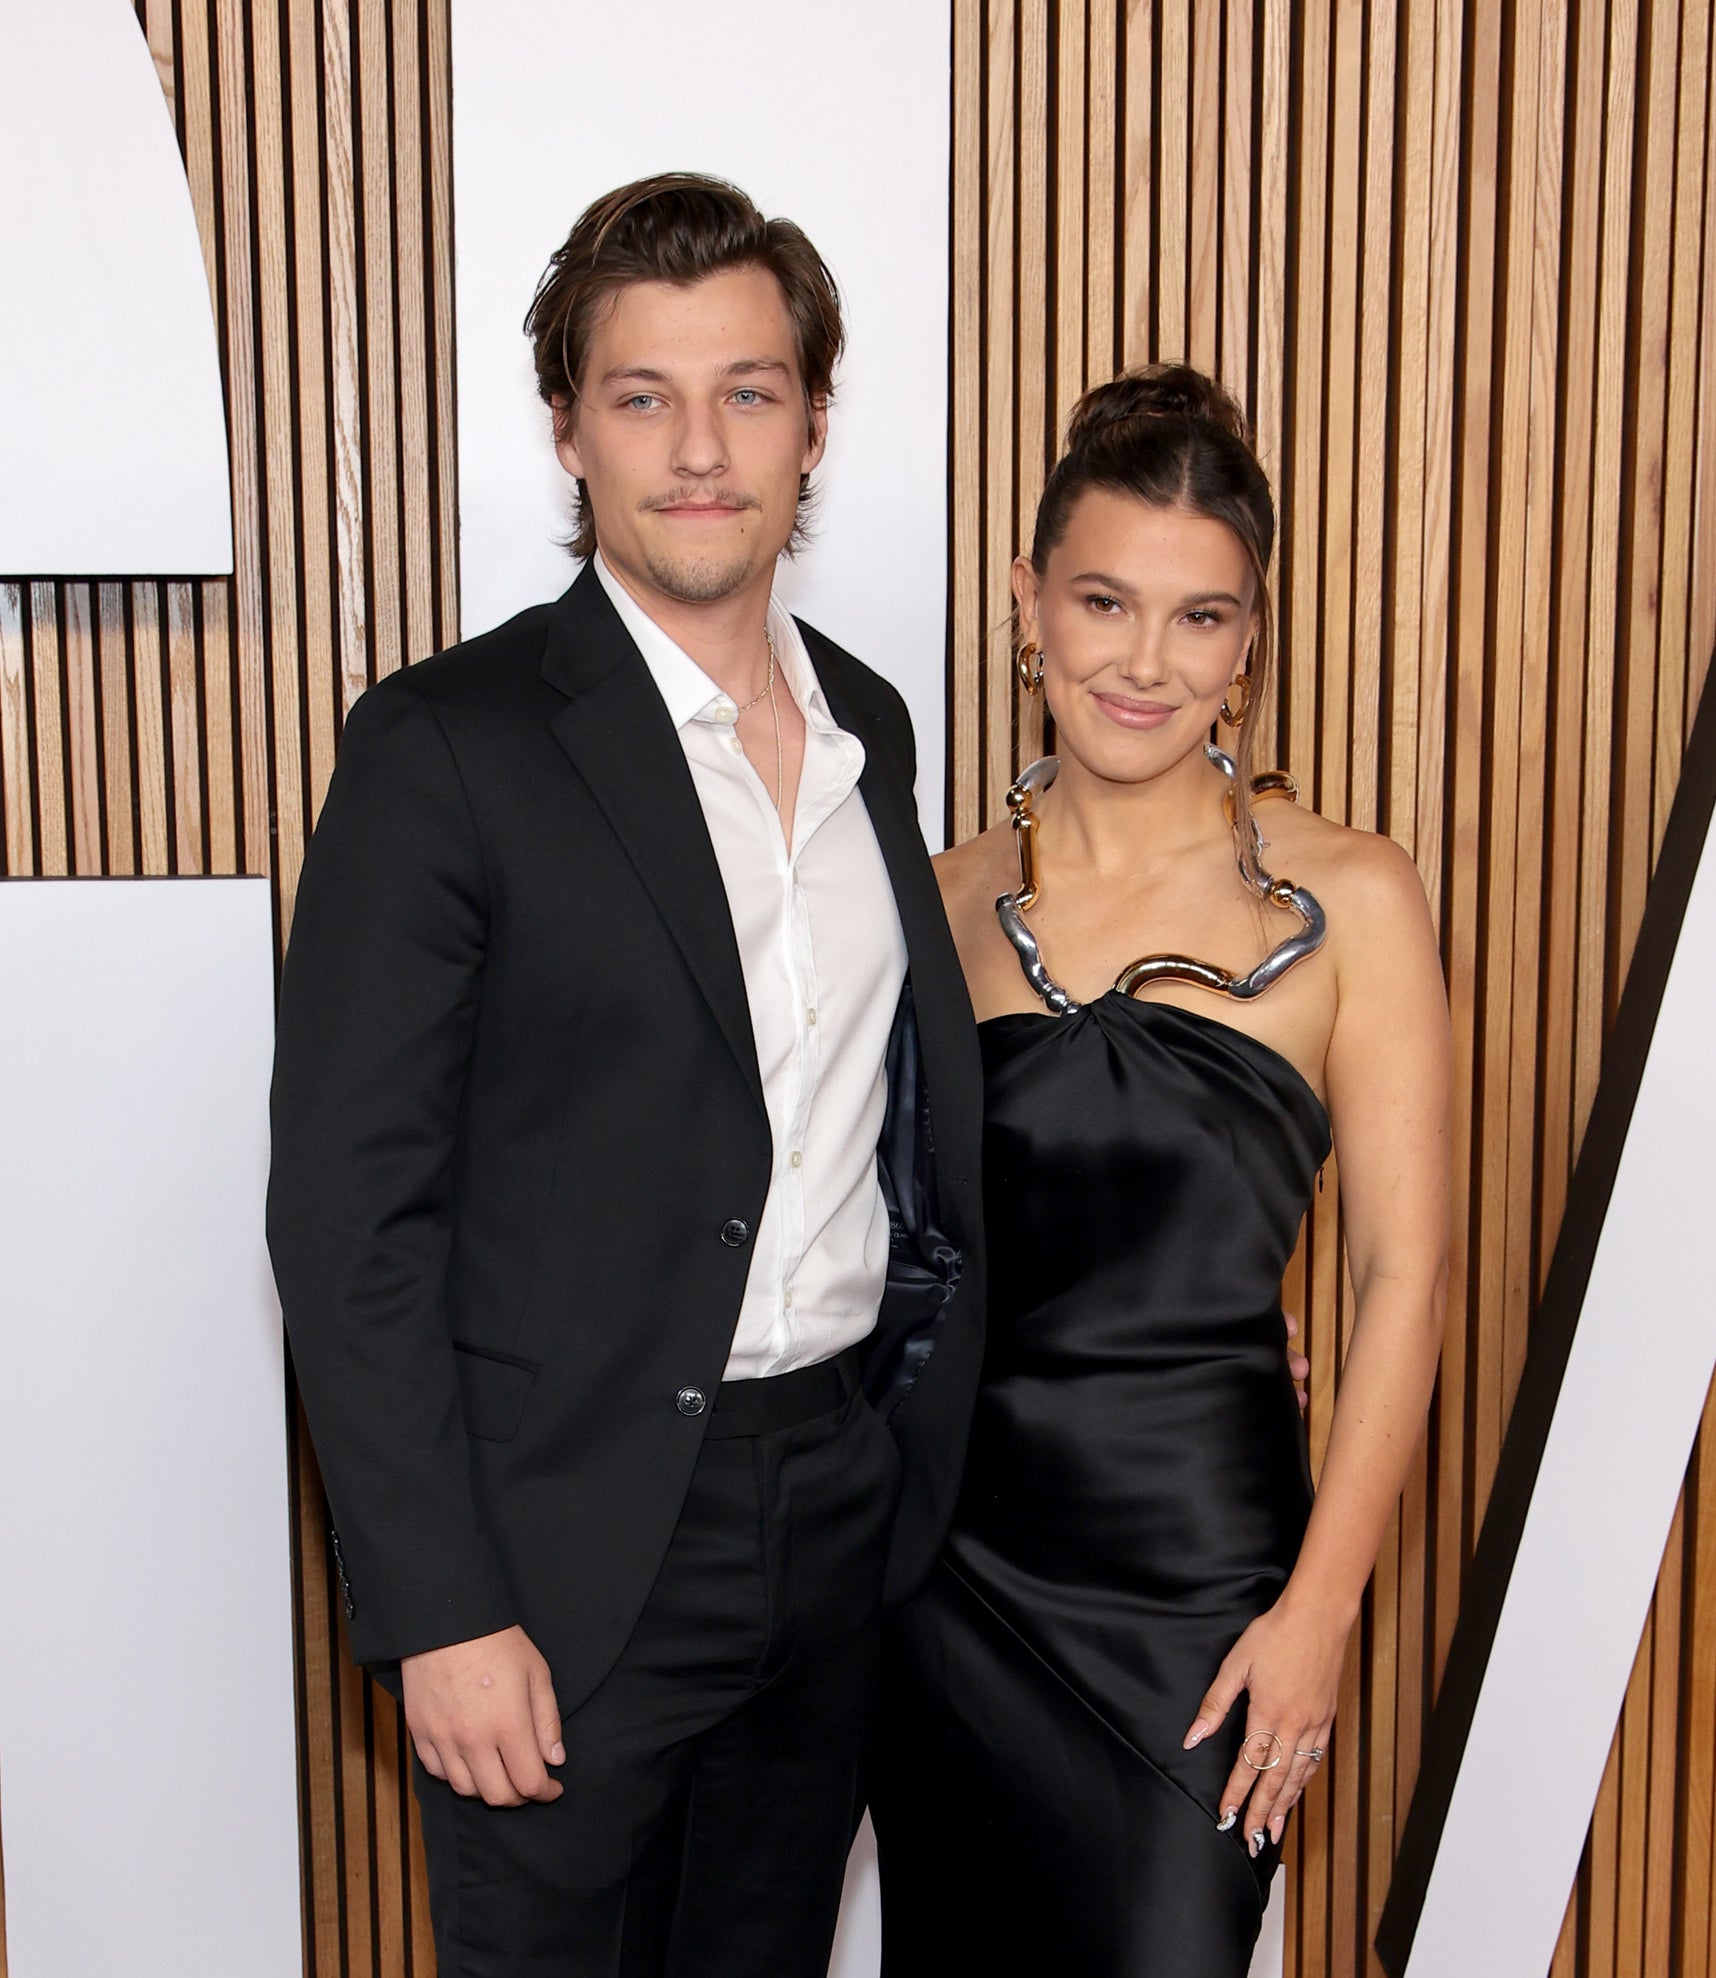 Millie Bobby Brown and her fiancé, Jake Bongiovi on the red carpet